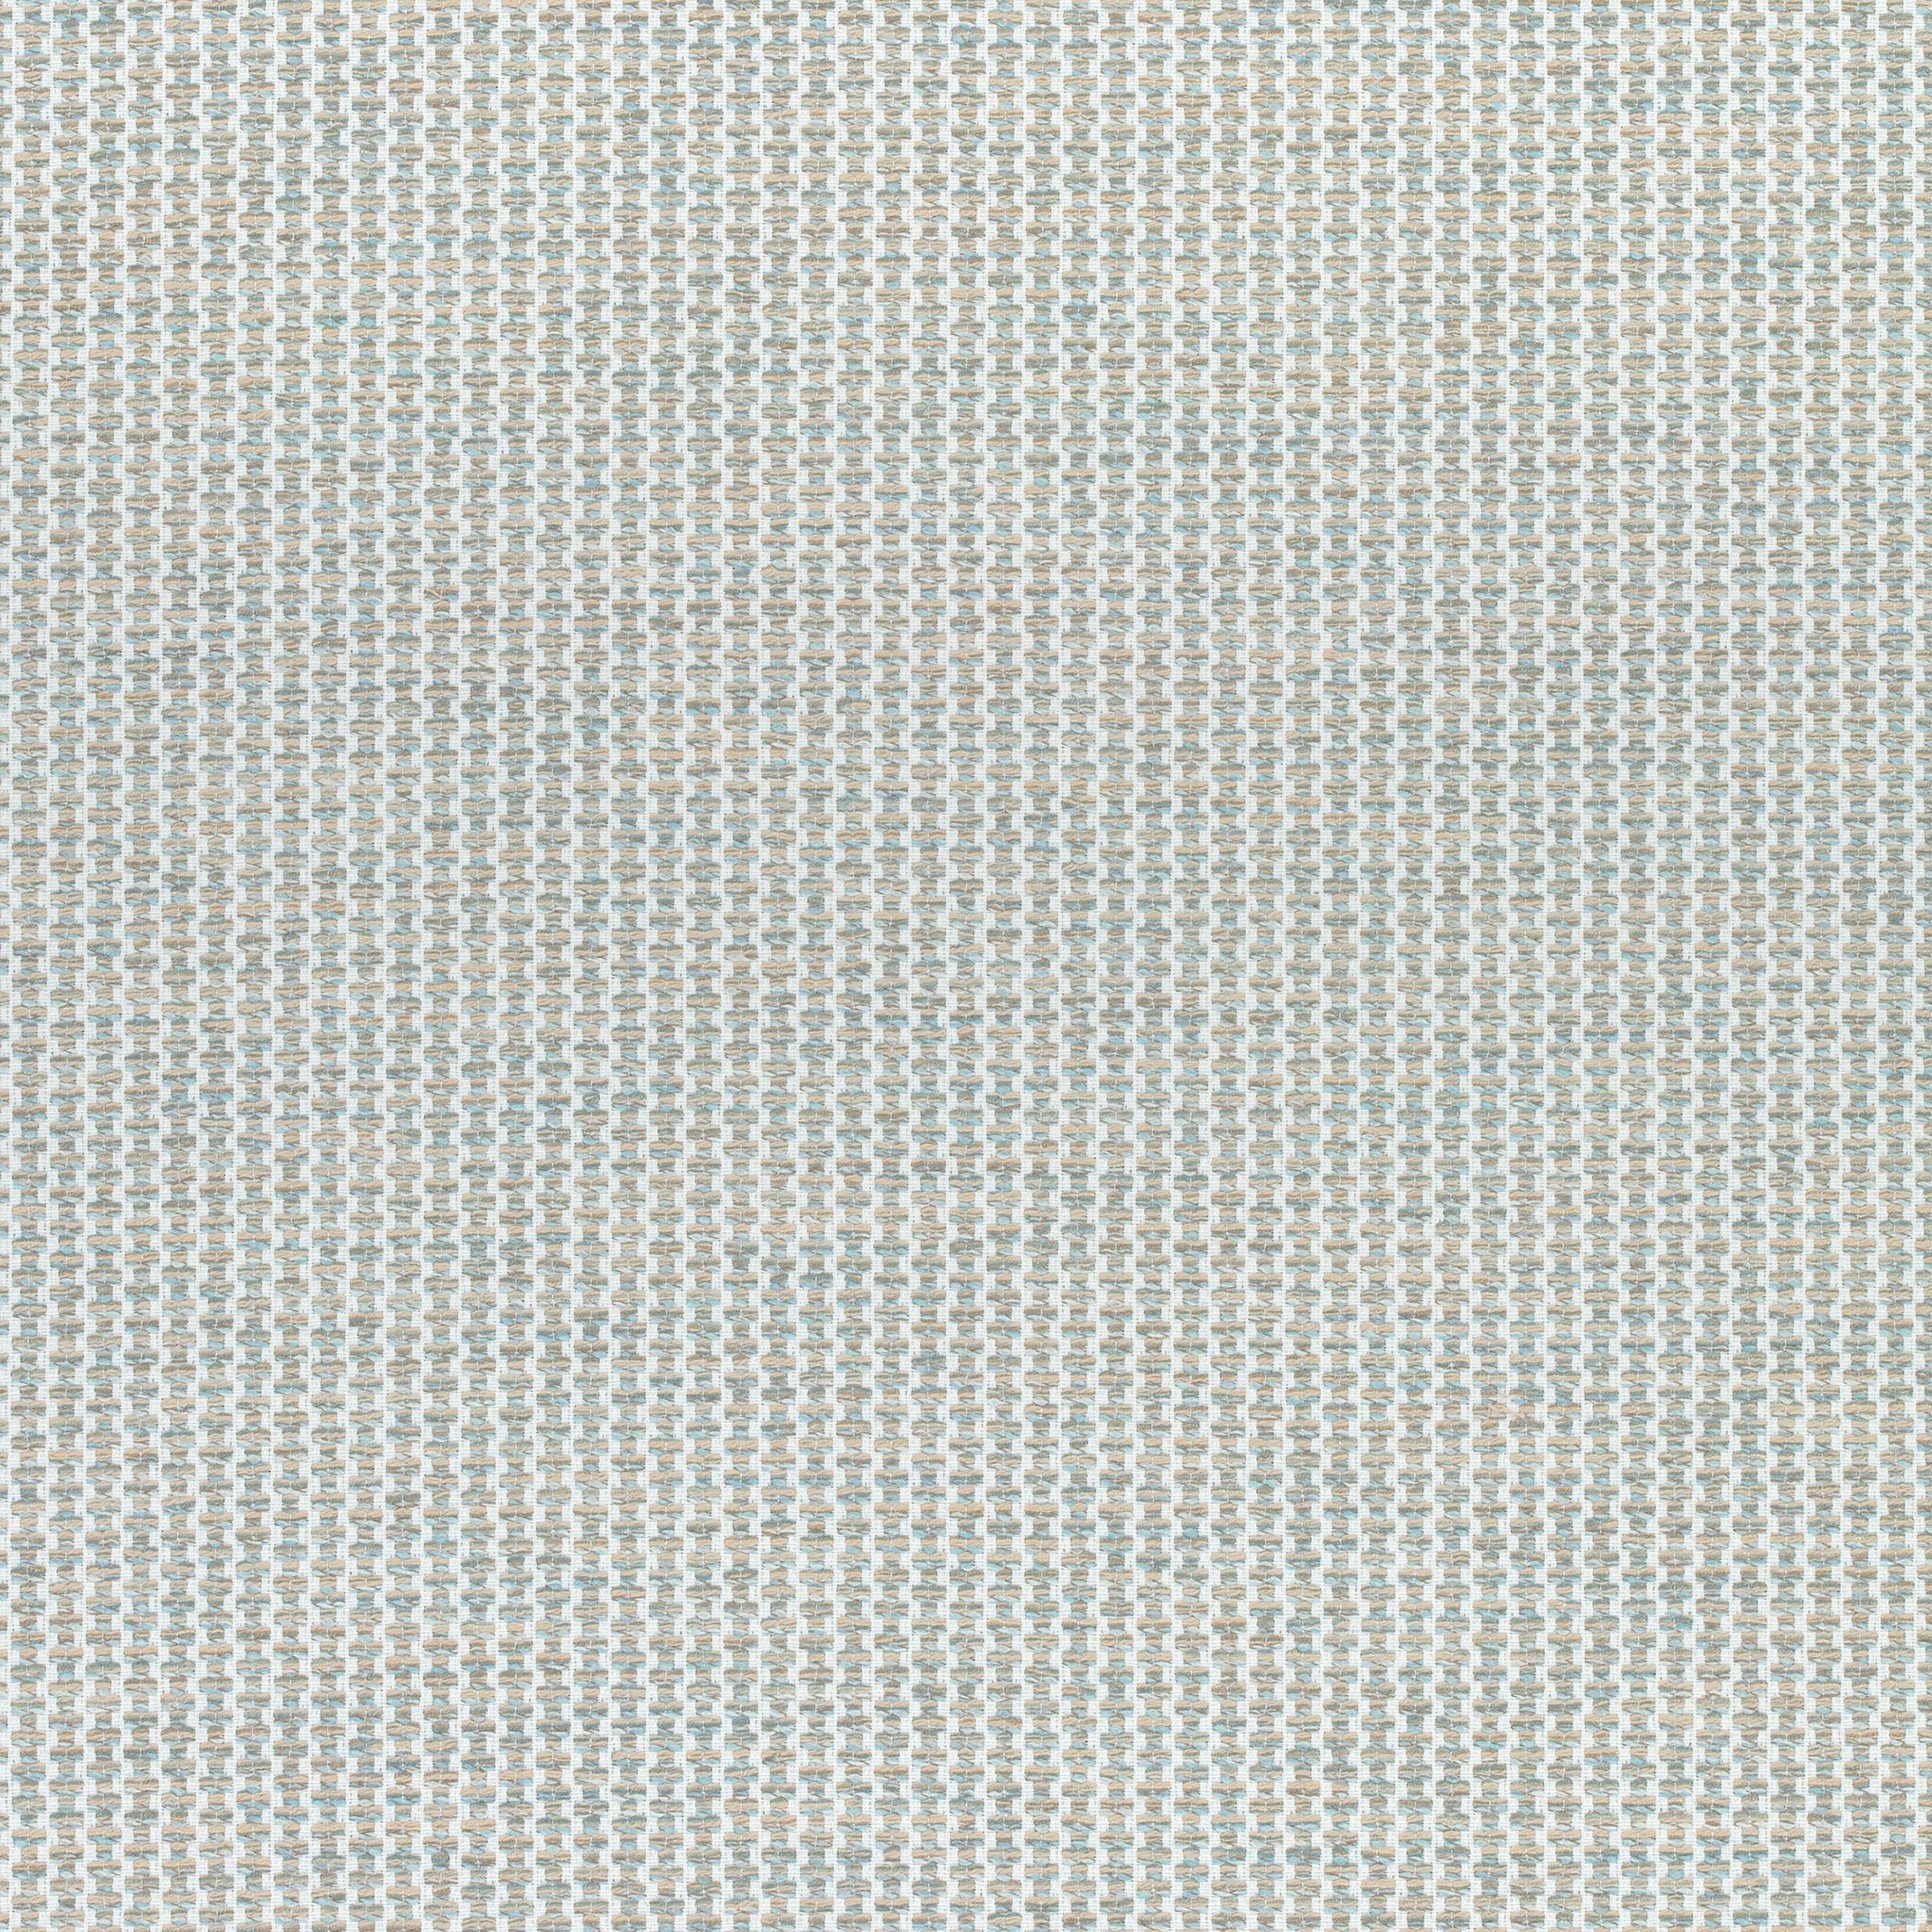 Ryder fabric in aqua color - pattern number W74090 - by Thibaut in the Cadence collection